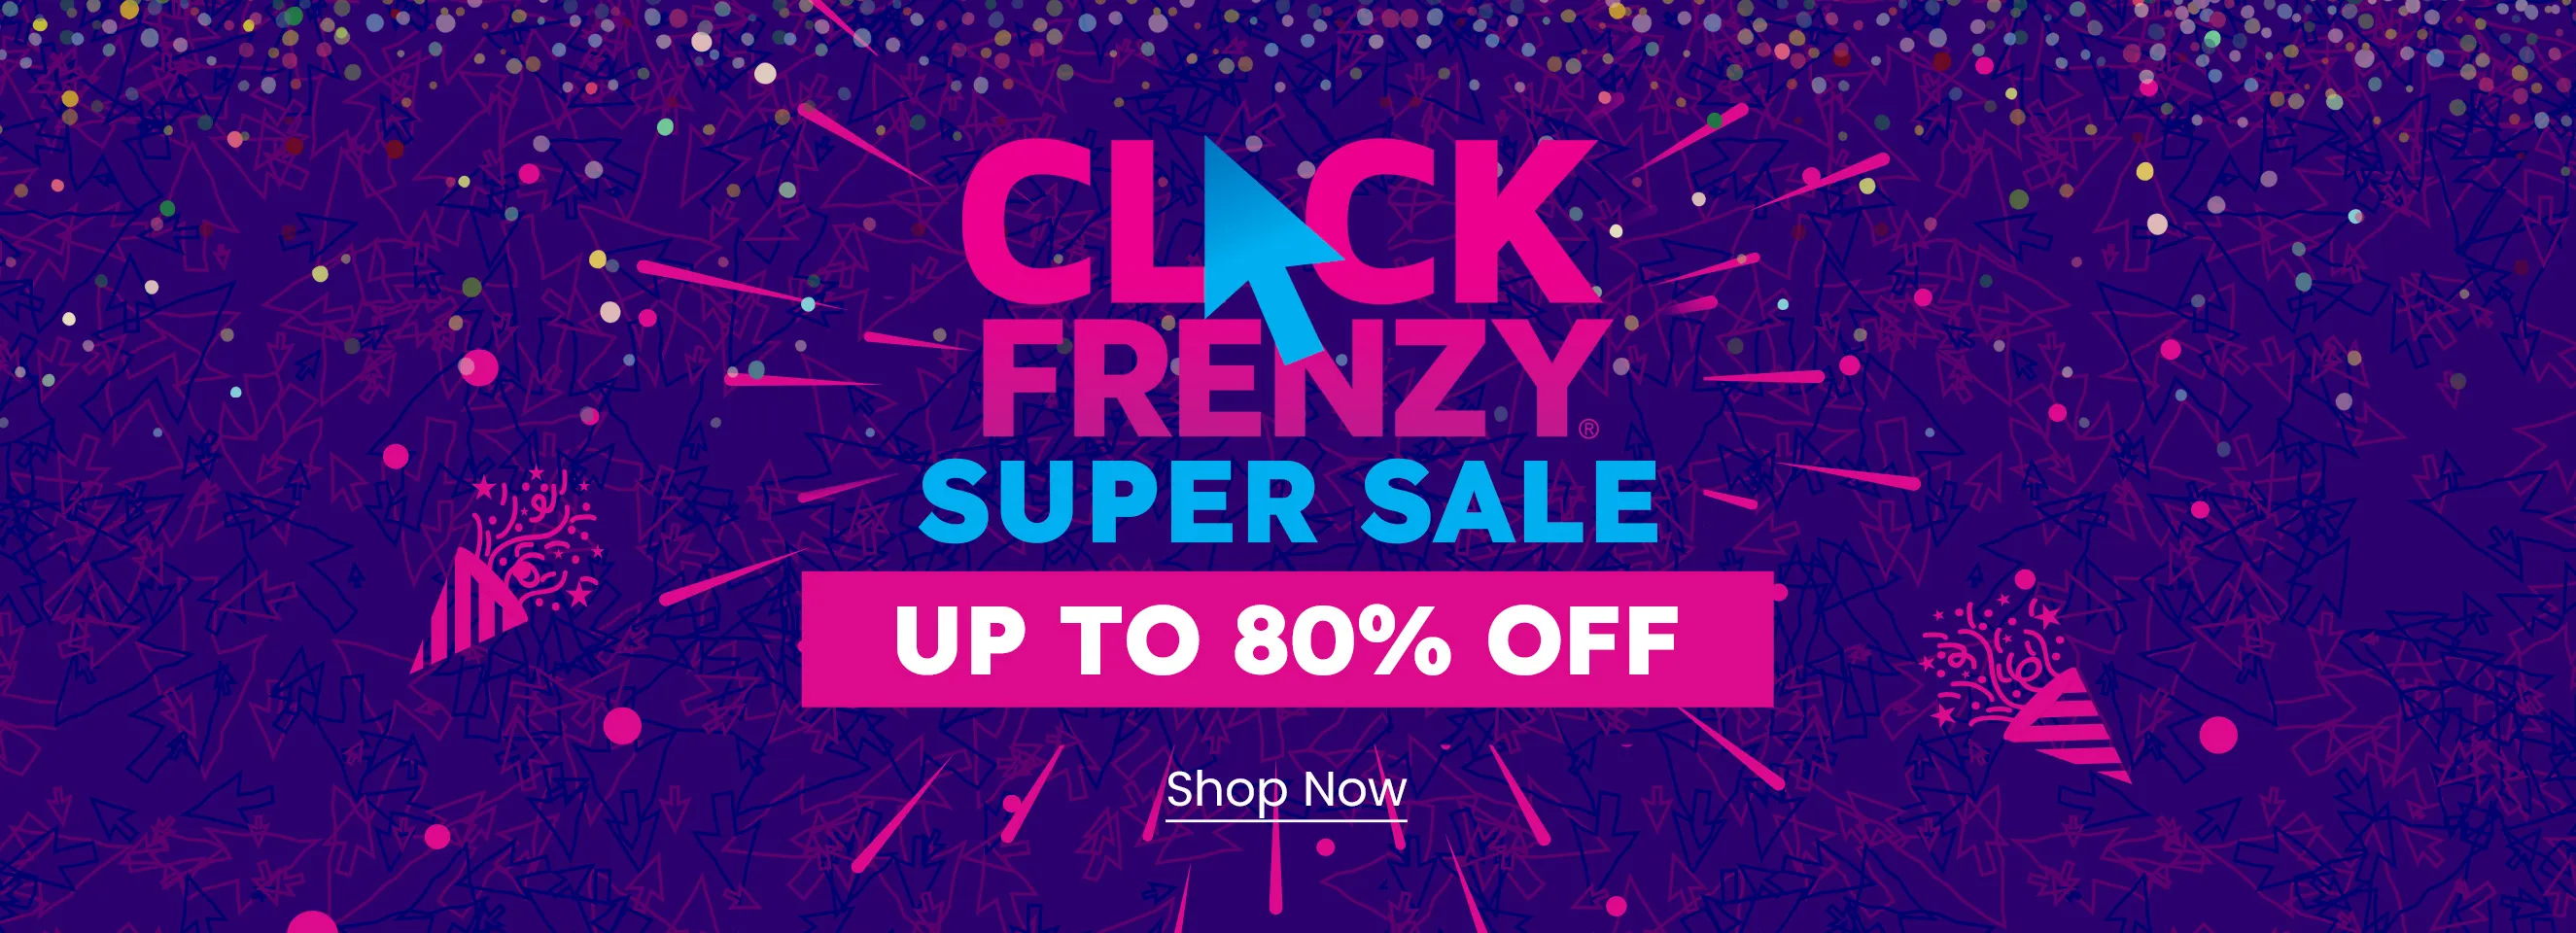 Click it to join Click Frenzy activity